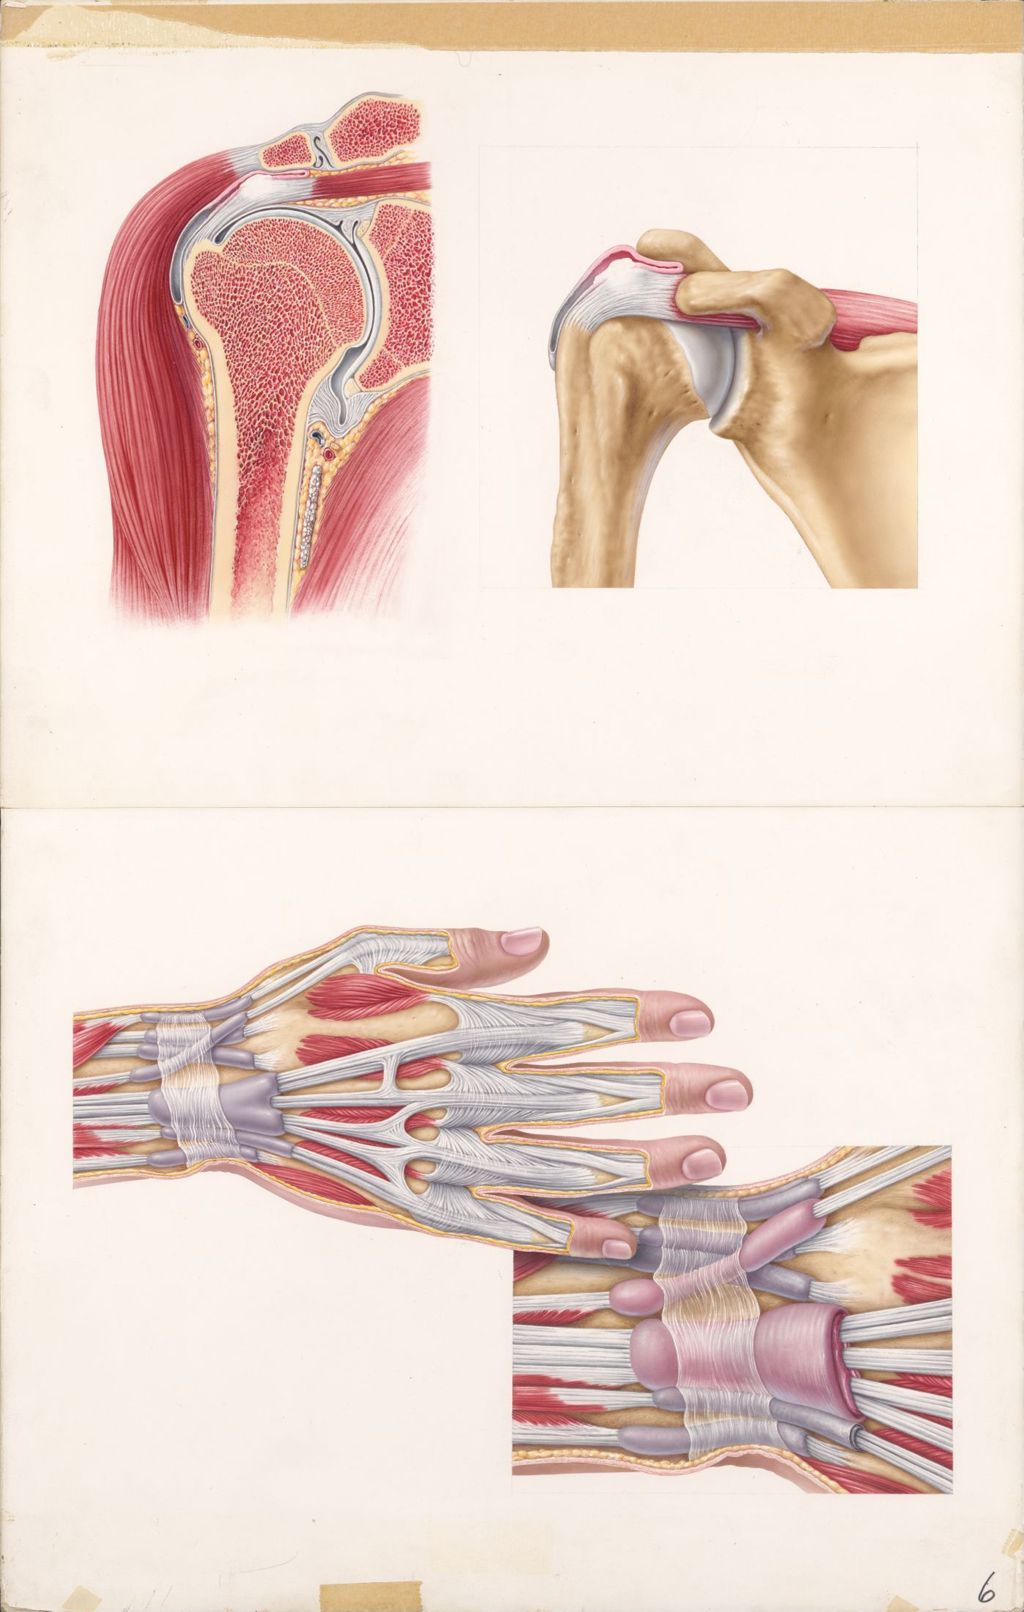 Medical Profiles, Decadron with Xylocaine, Sites and appearances of some musculoskeletal disorders